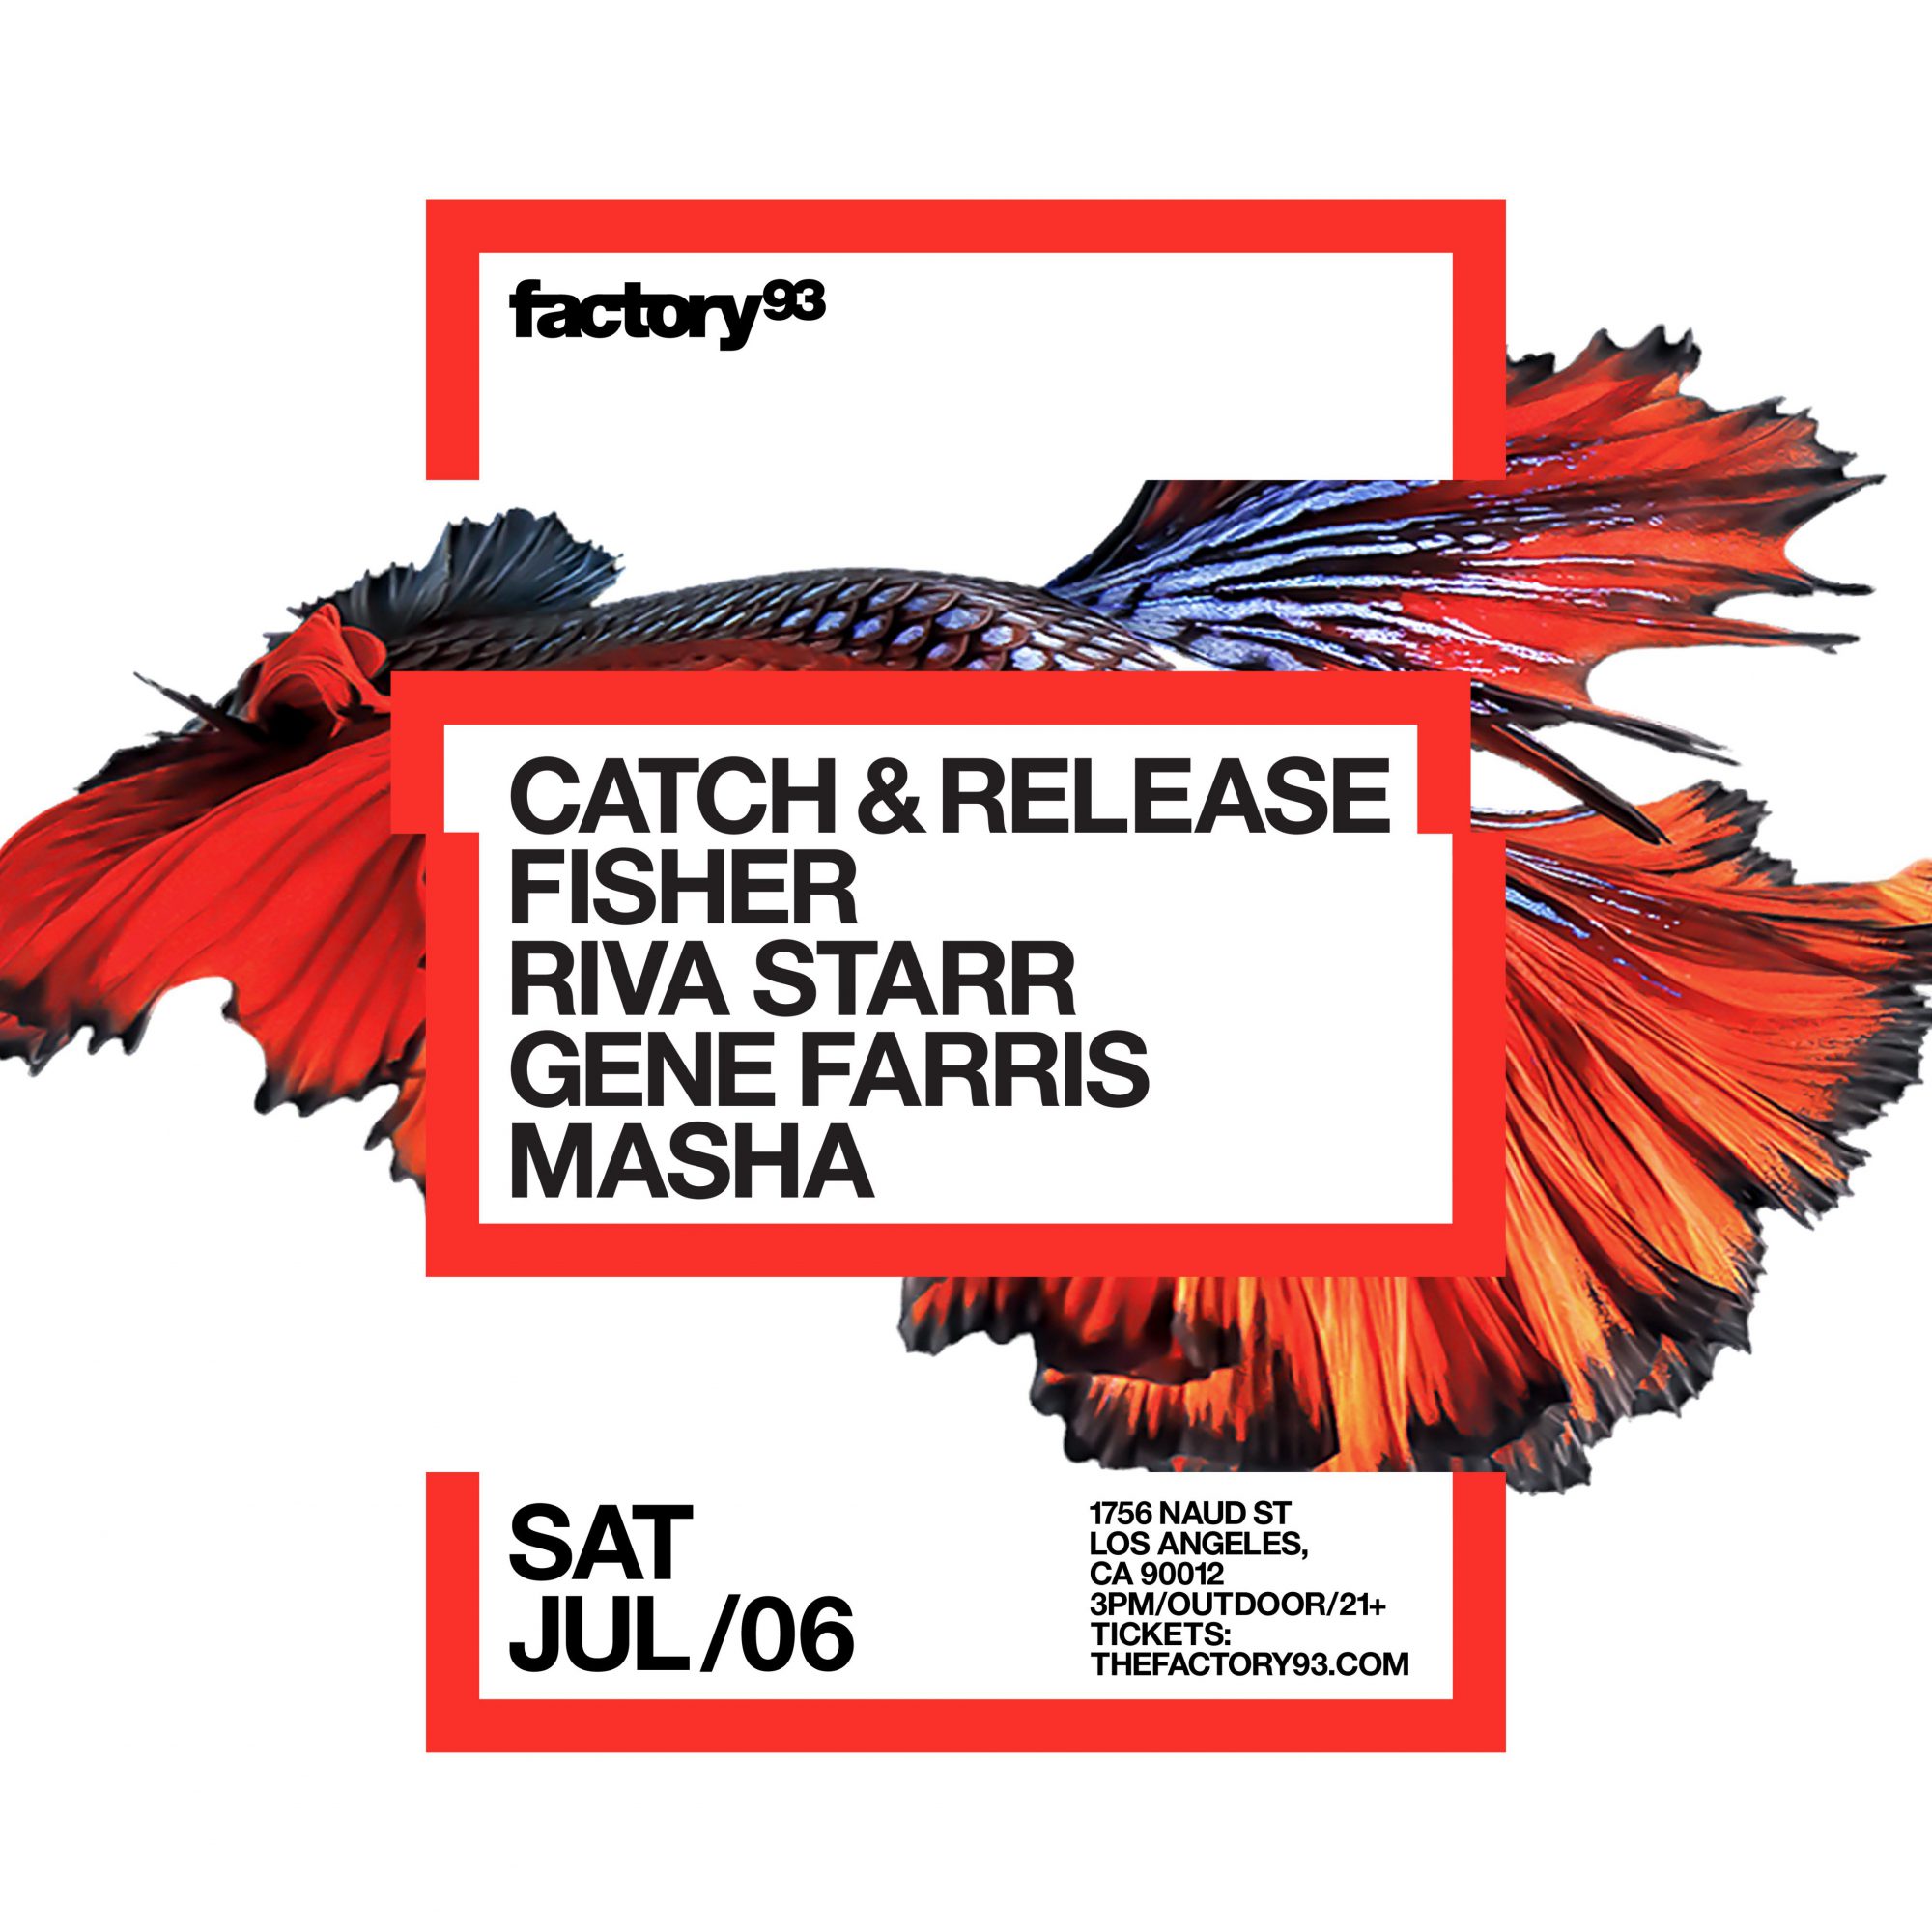 Factory 93 presents Fisher: Catch & Release